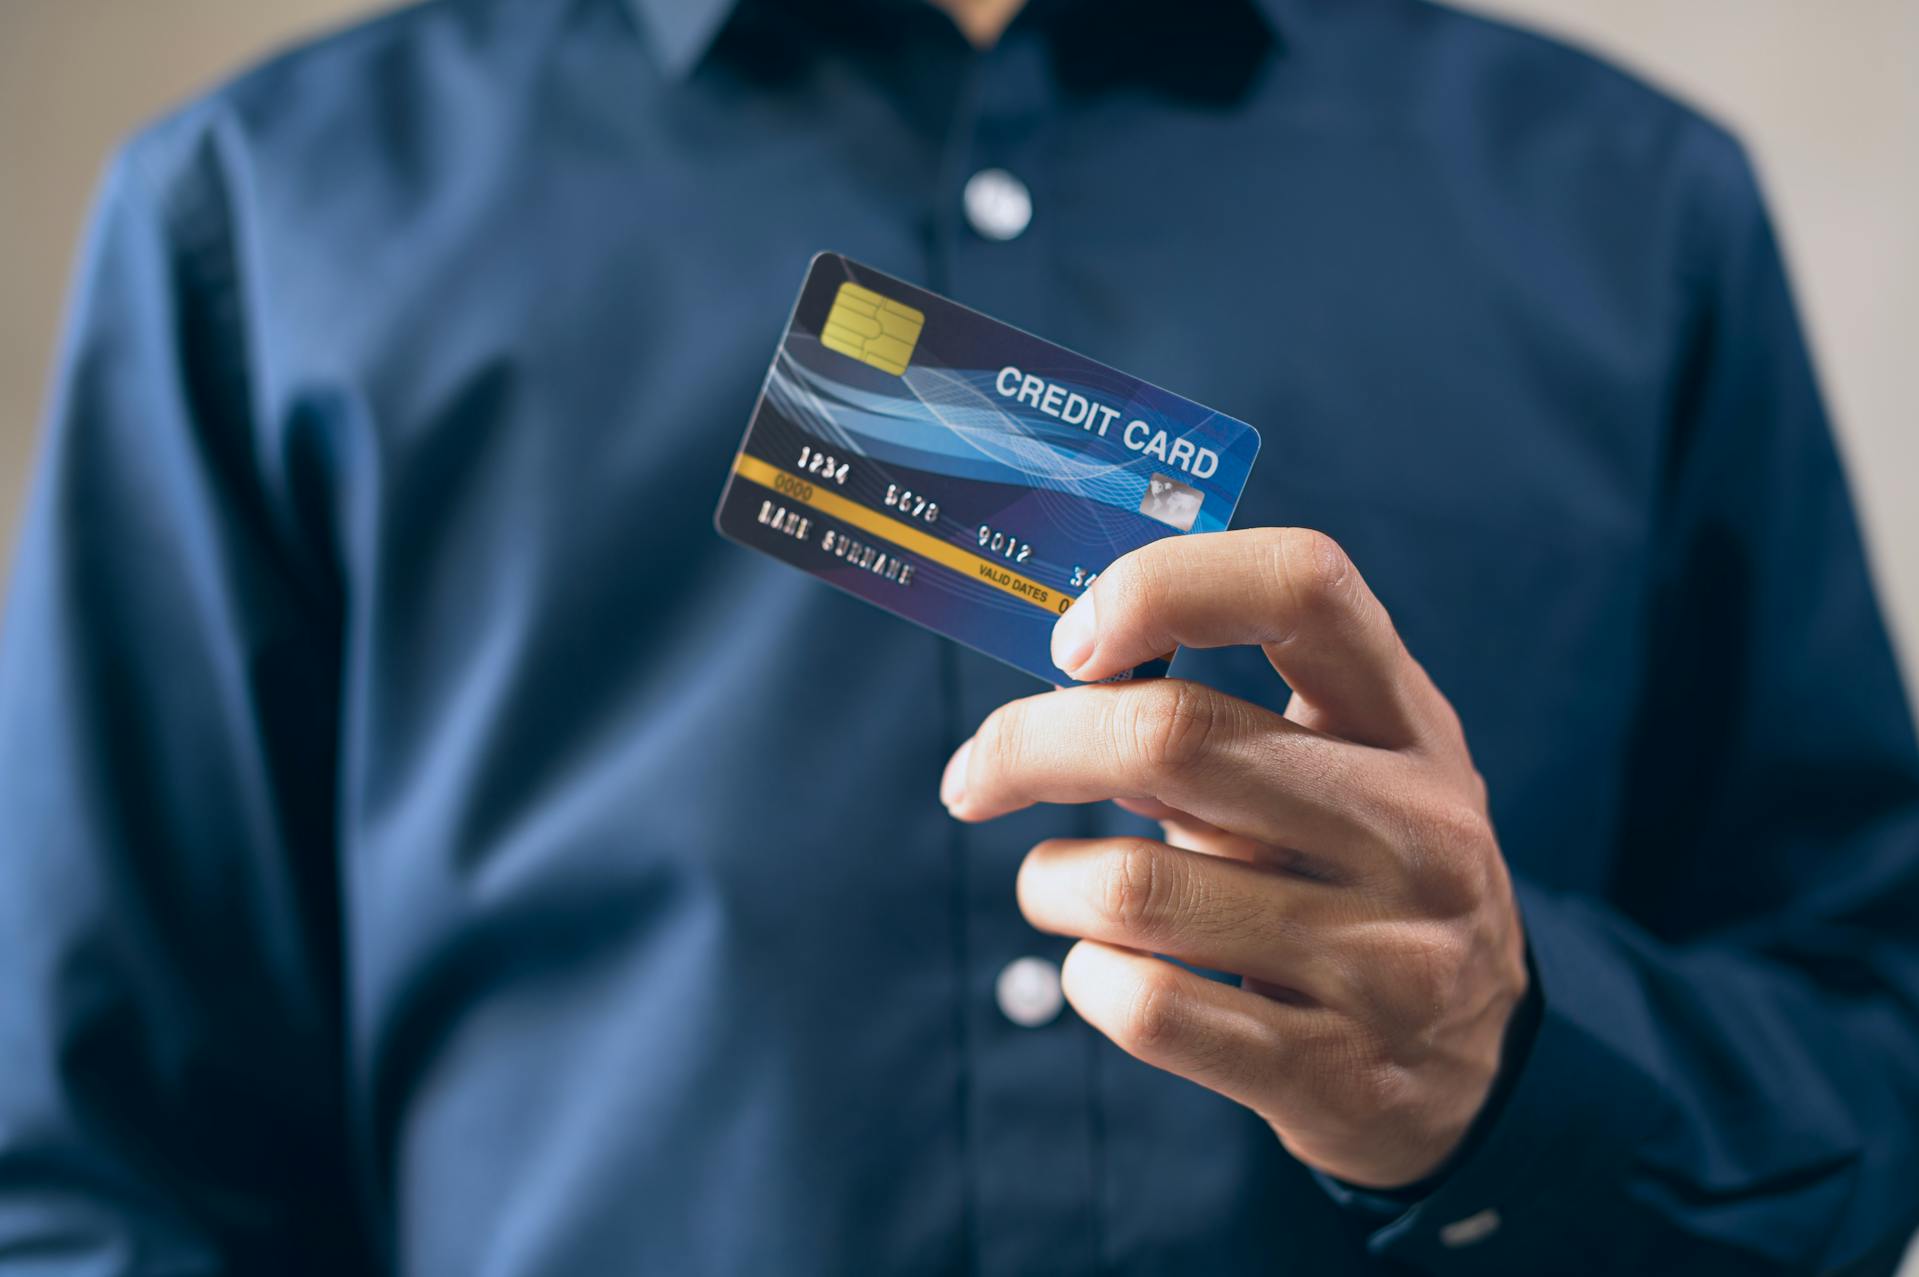 Man holding a credit card | Source: Pexels